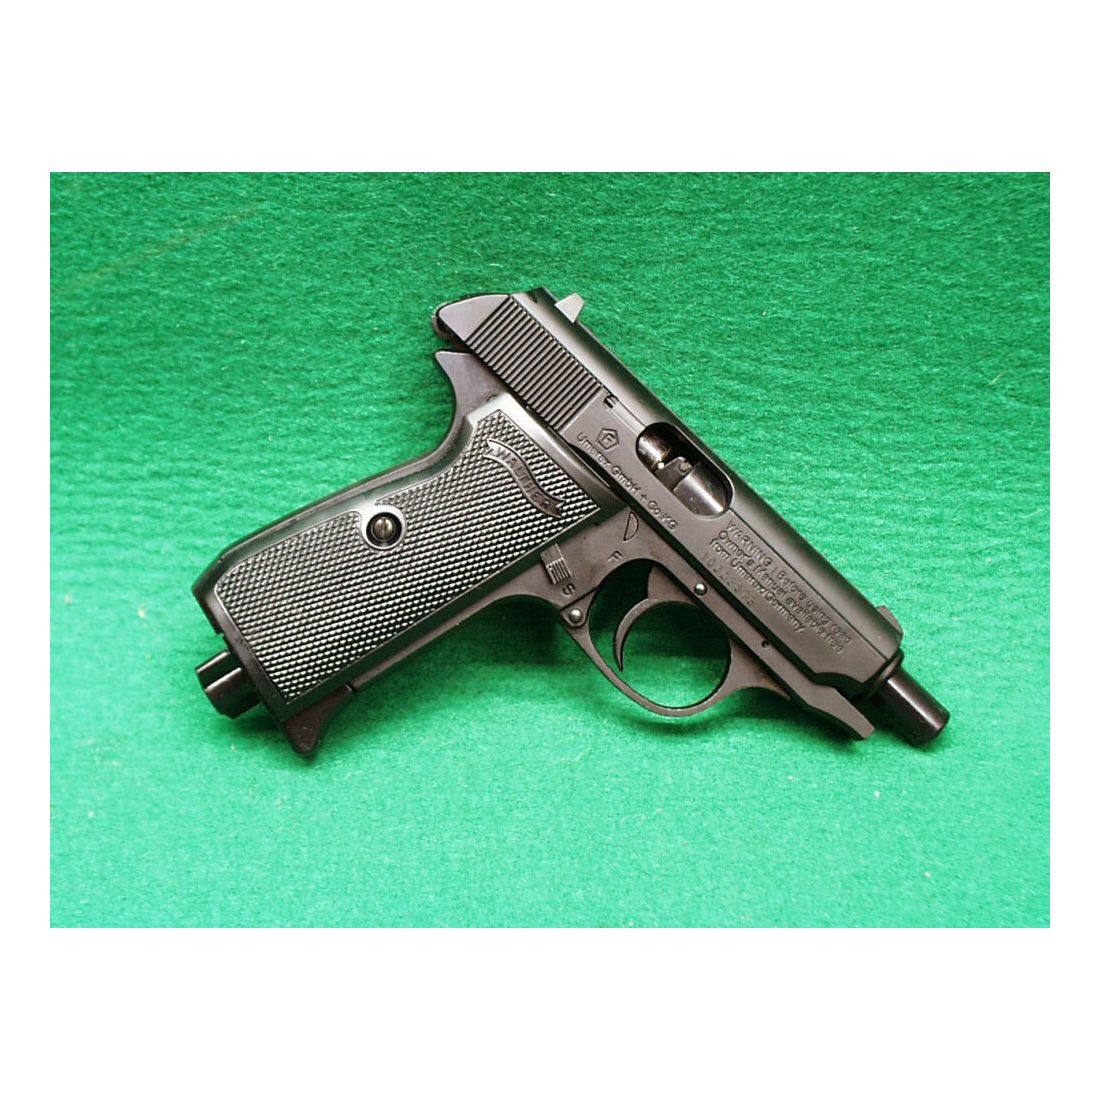 Walther	 PPK/S CO2 Pistole